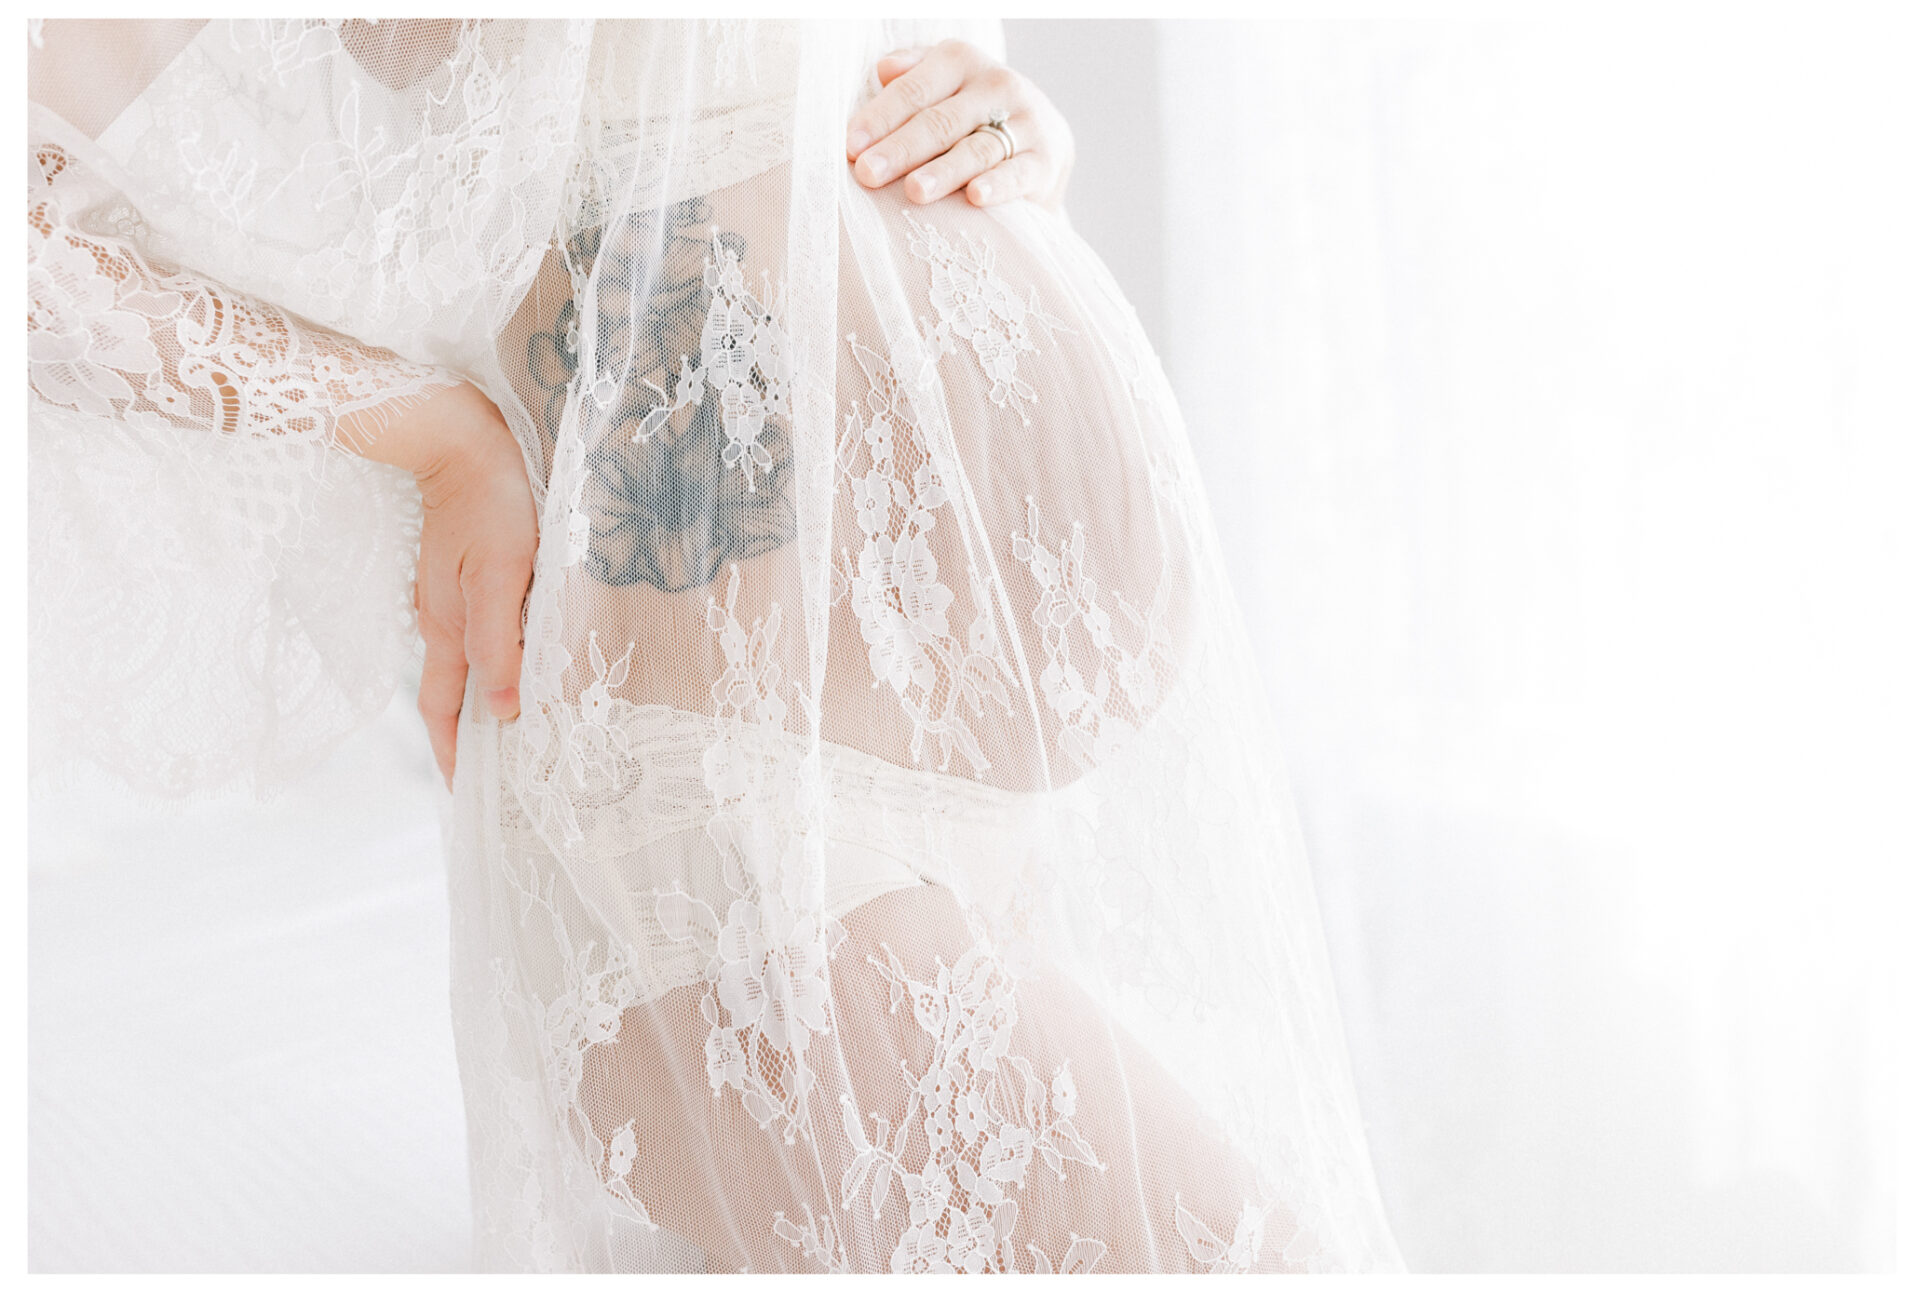 Winter Freire Photography | Fine Art Maternity Boudoir | A close image of an expecting mother's baby bump while wearing a sheer lace dress